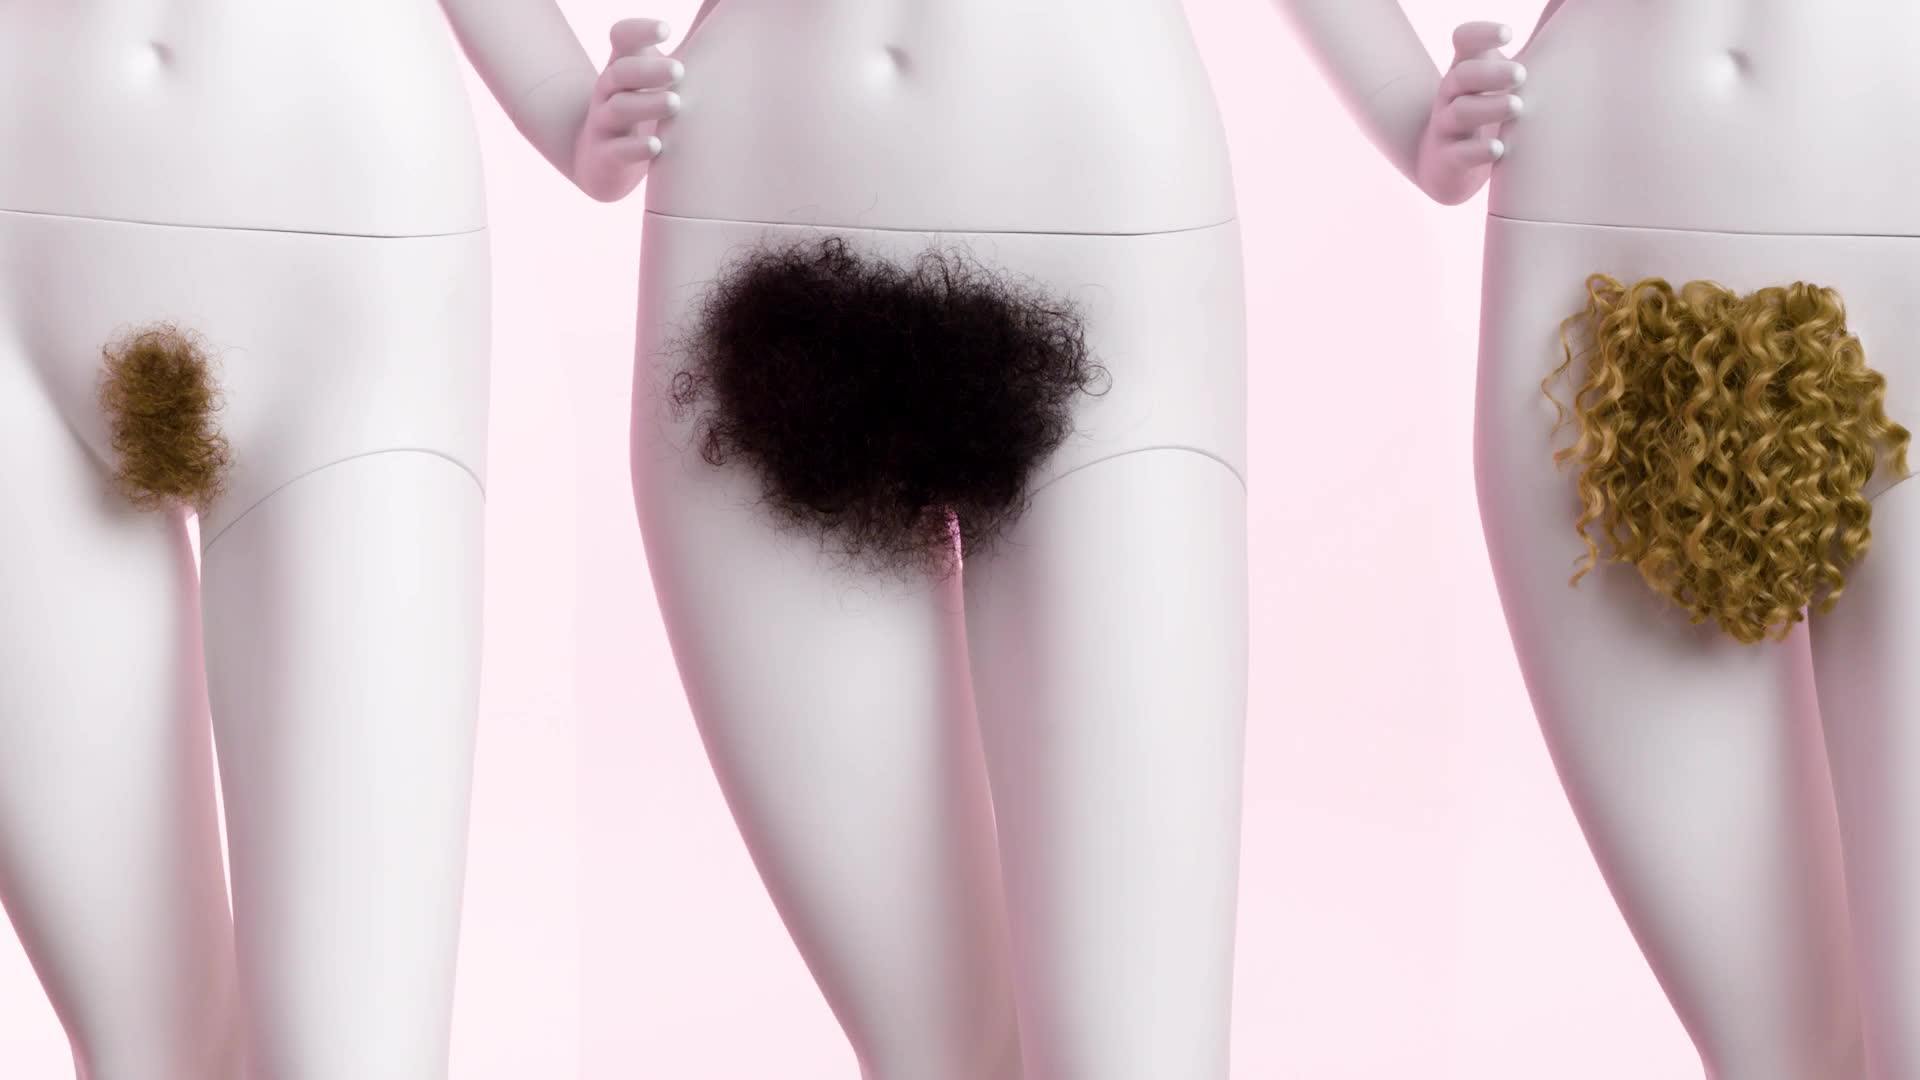 amy yip recommends pubic hair pics pic